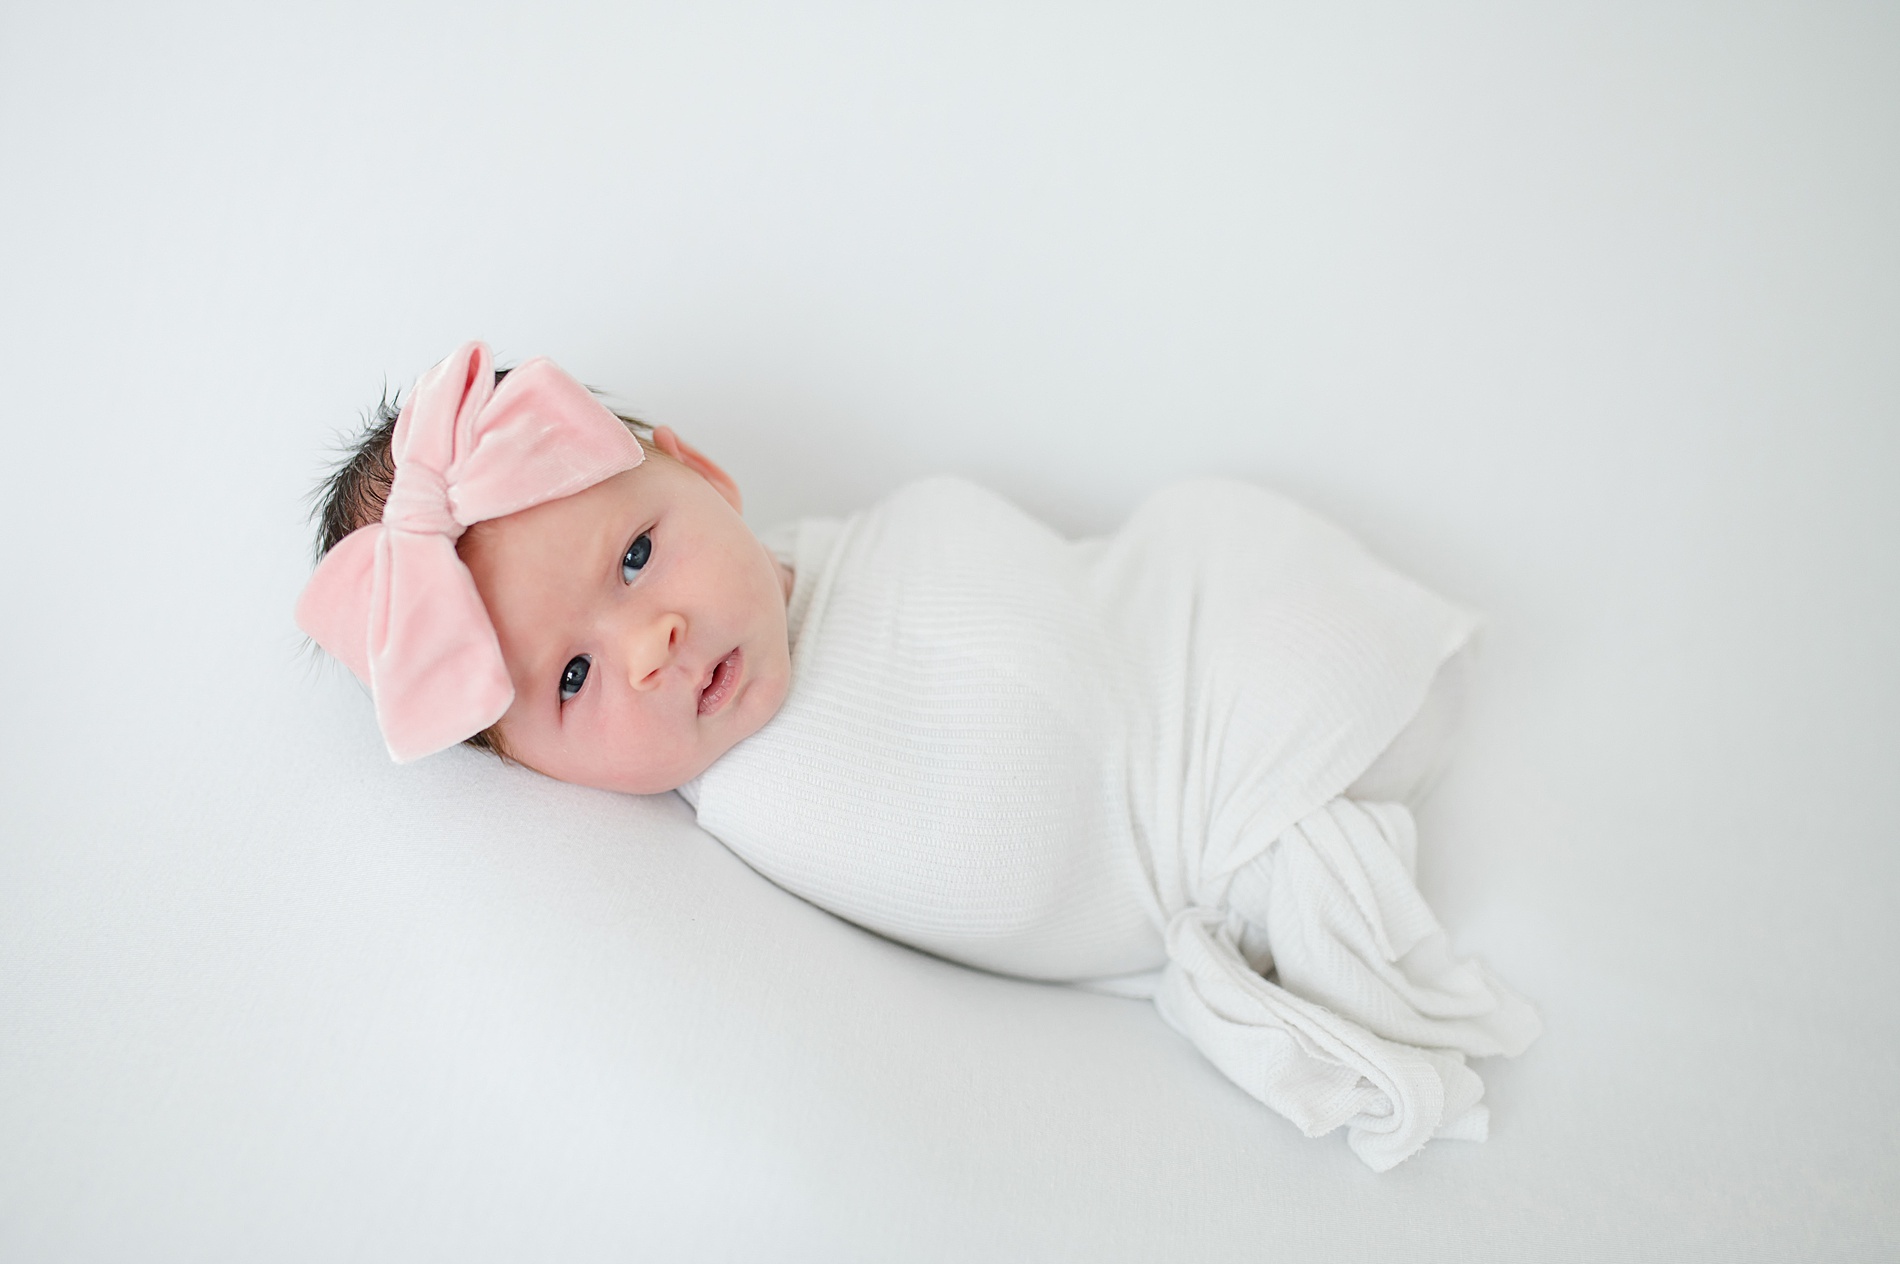 Dallas Newborn Photographer, Lindsey Dutton Photography shares Why I Use White in Newborn  Photos